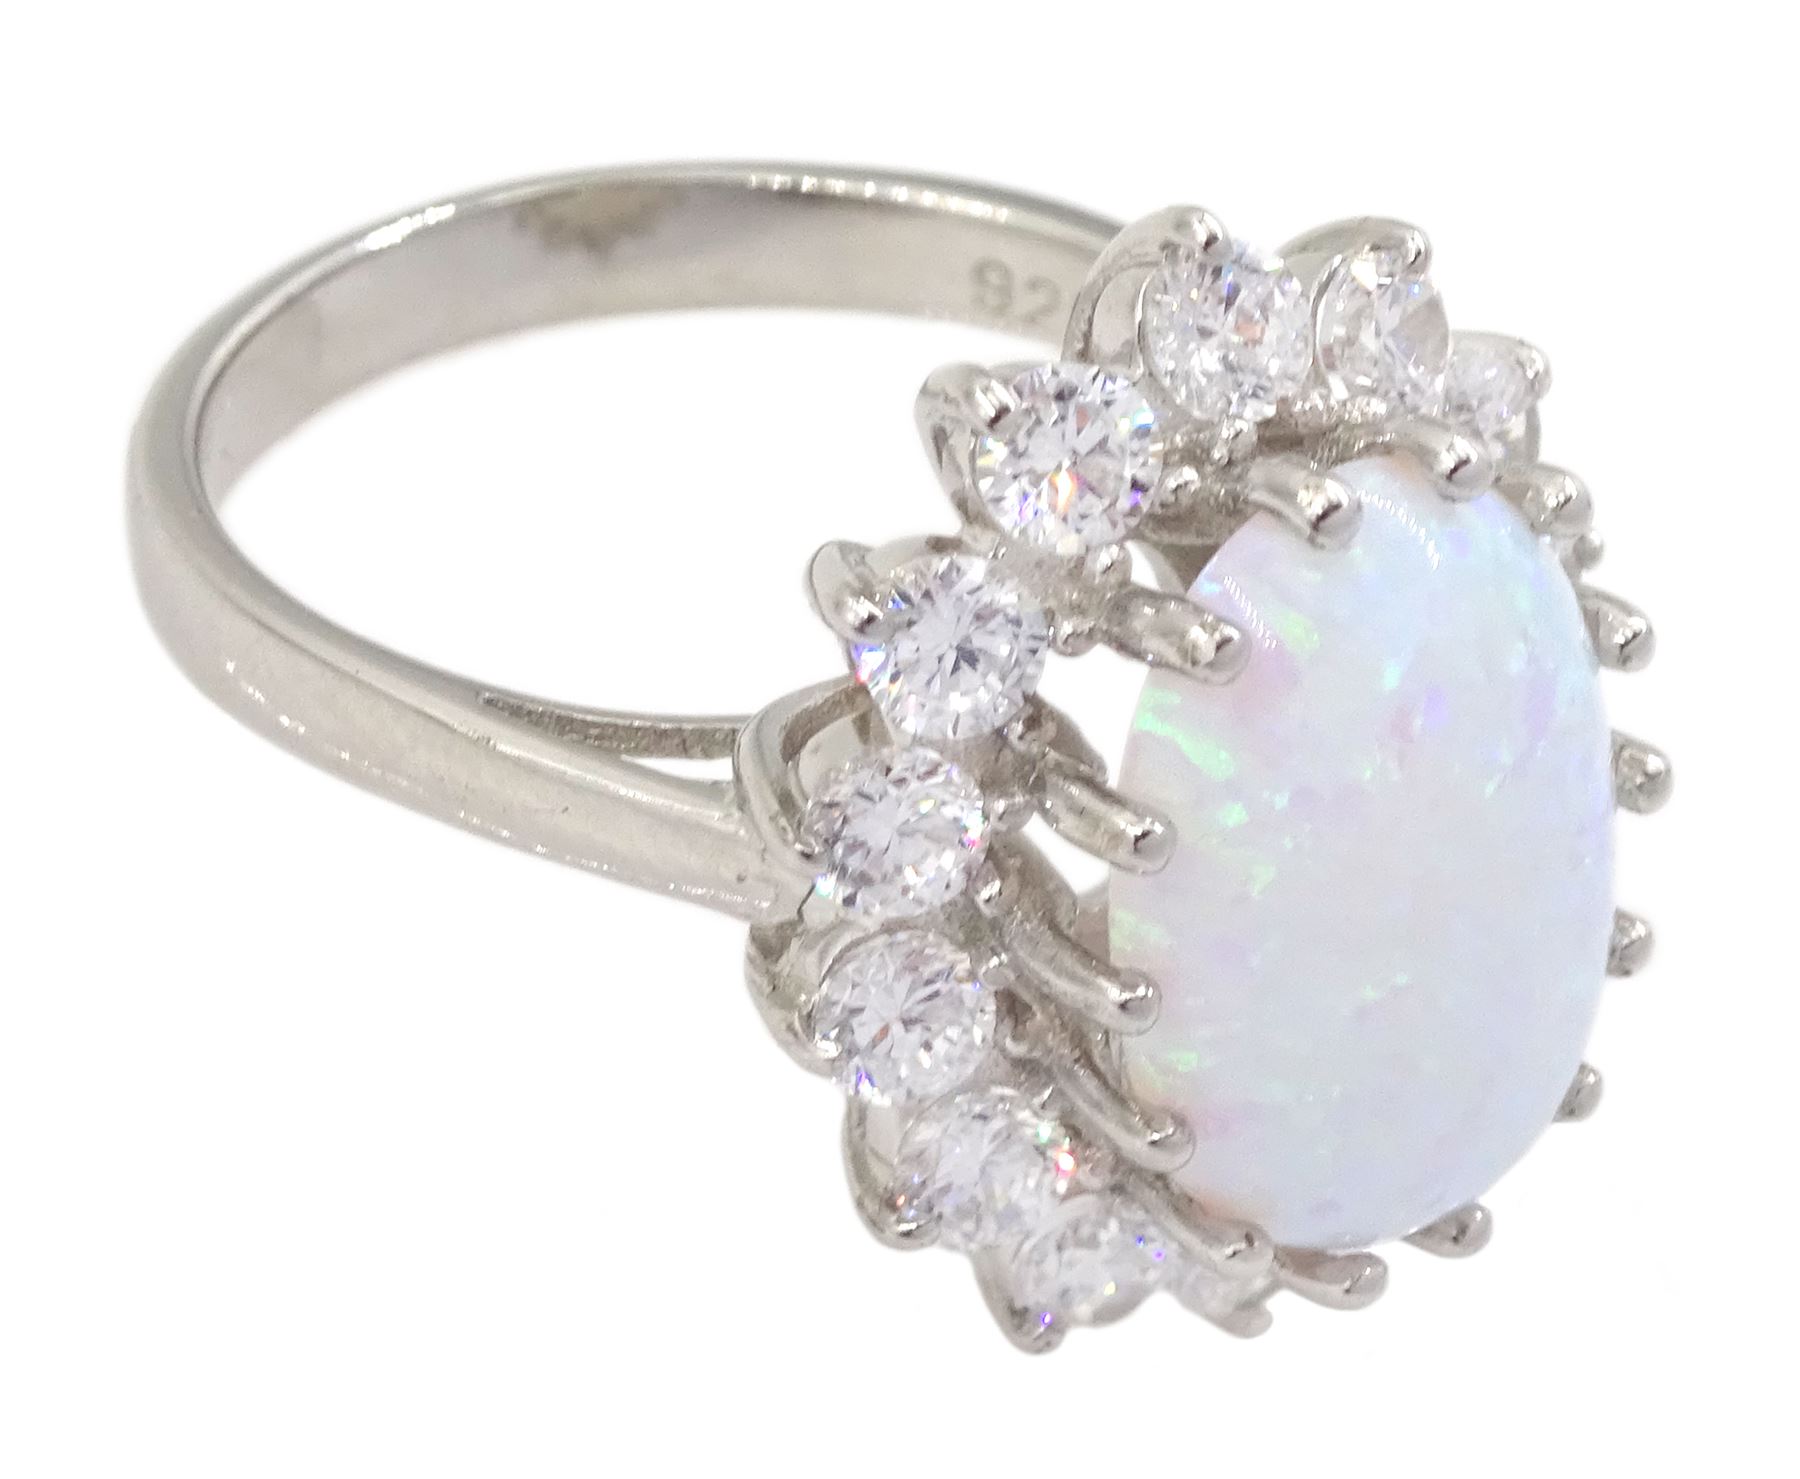 Silver opal and cubic zirconia cluster ring - Image 3 of 5